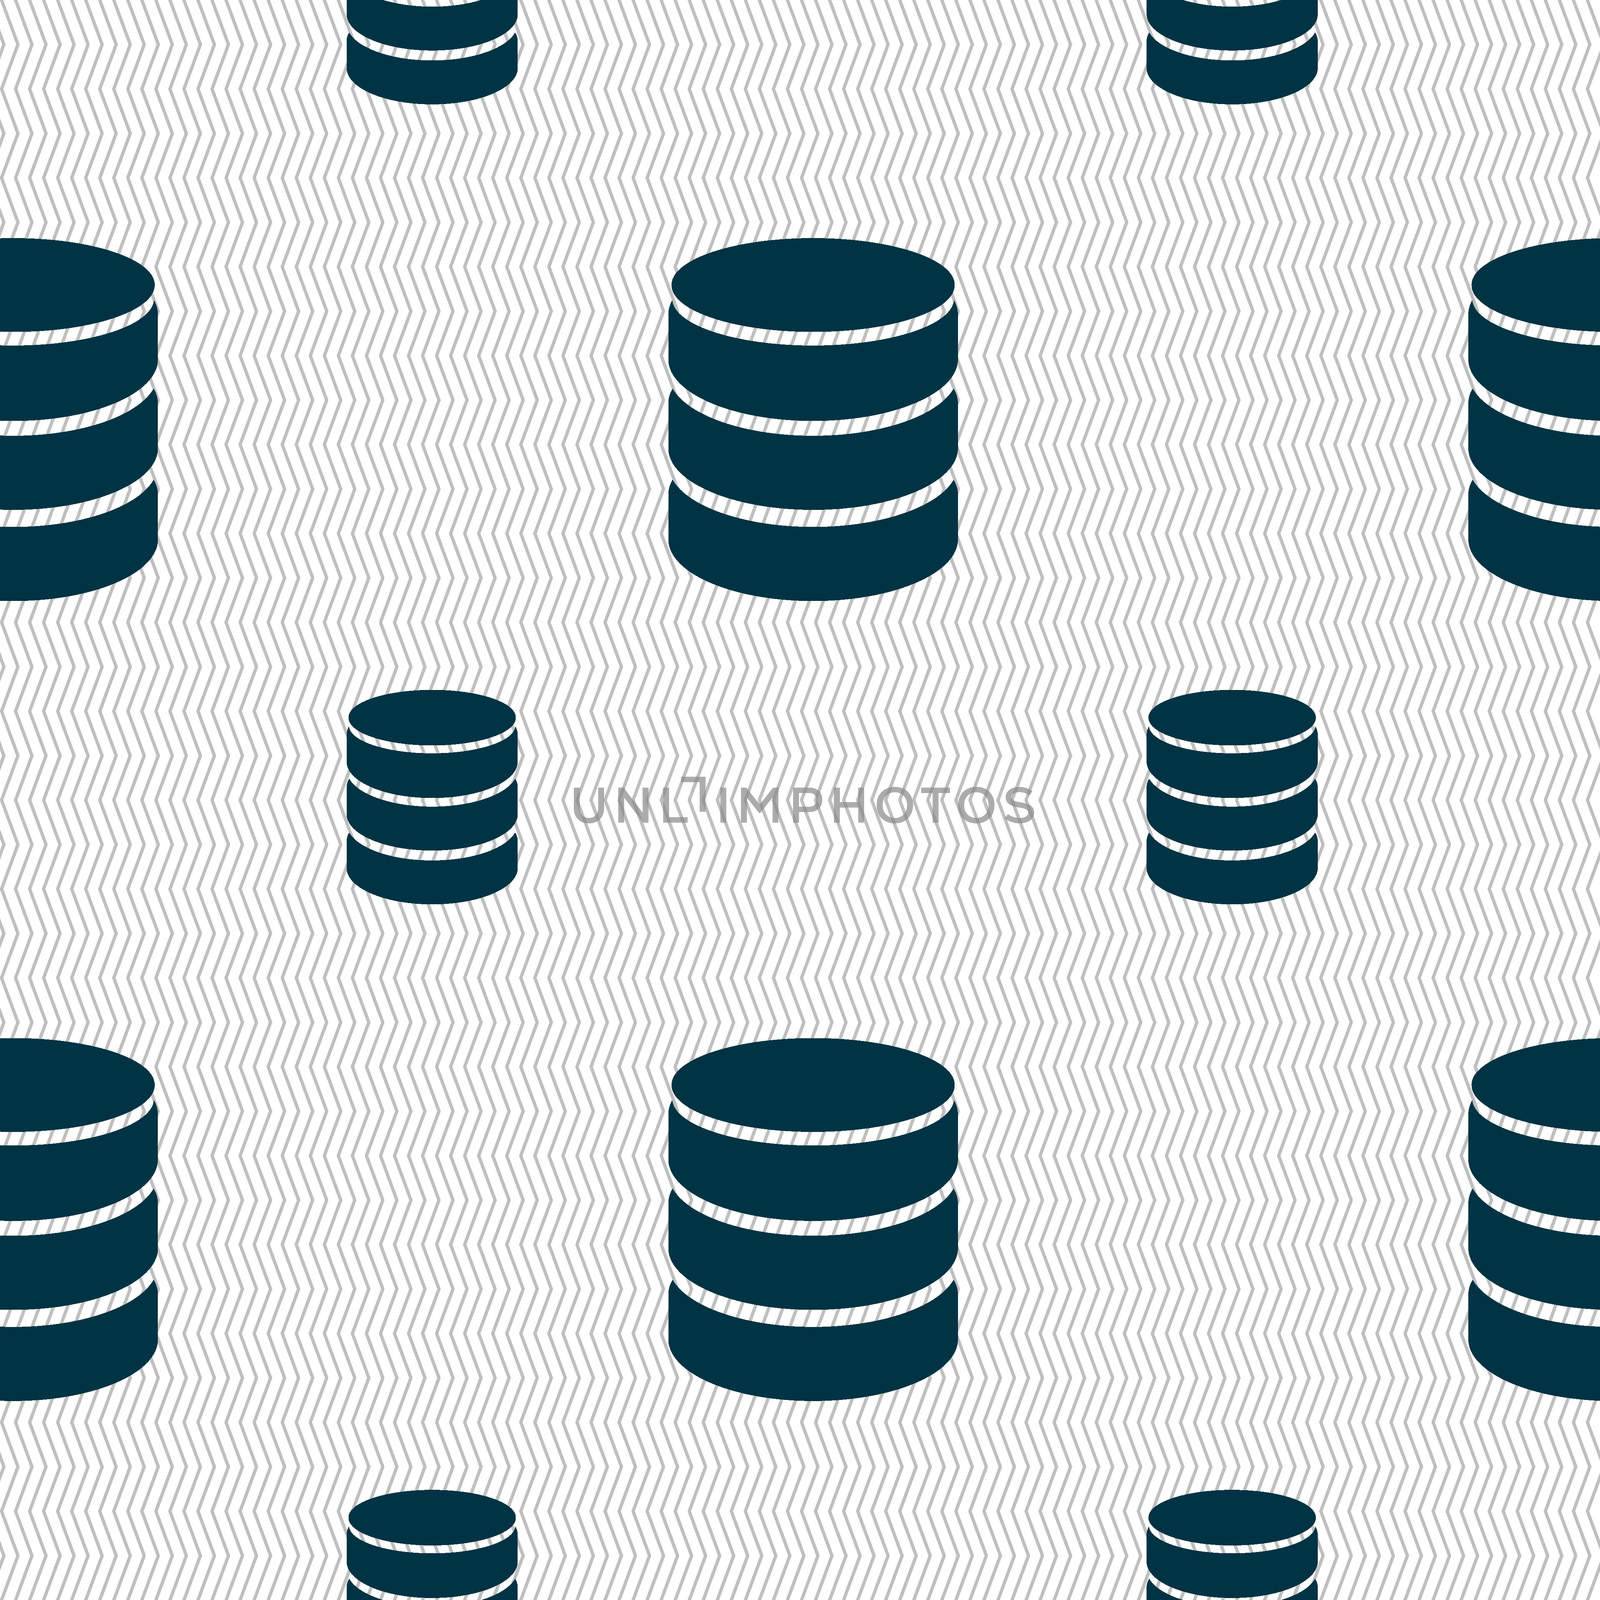 Hard disk and database sign icon. flash drive stick symbol. Seamless pattern with geometric texture. illustration